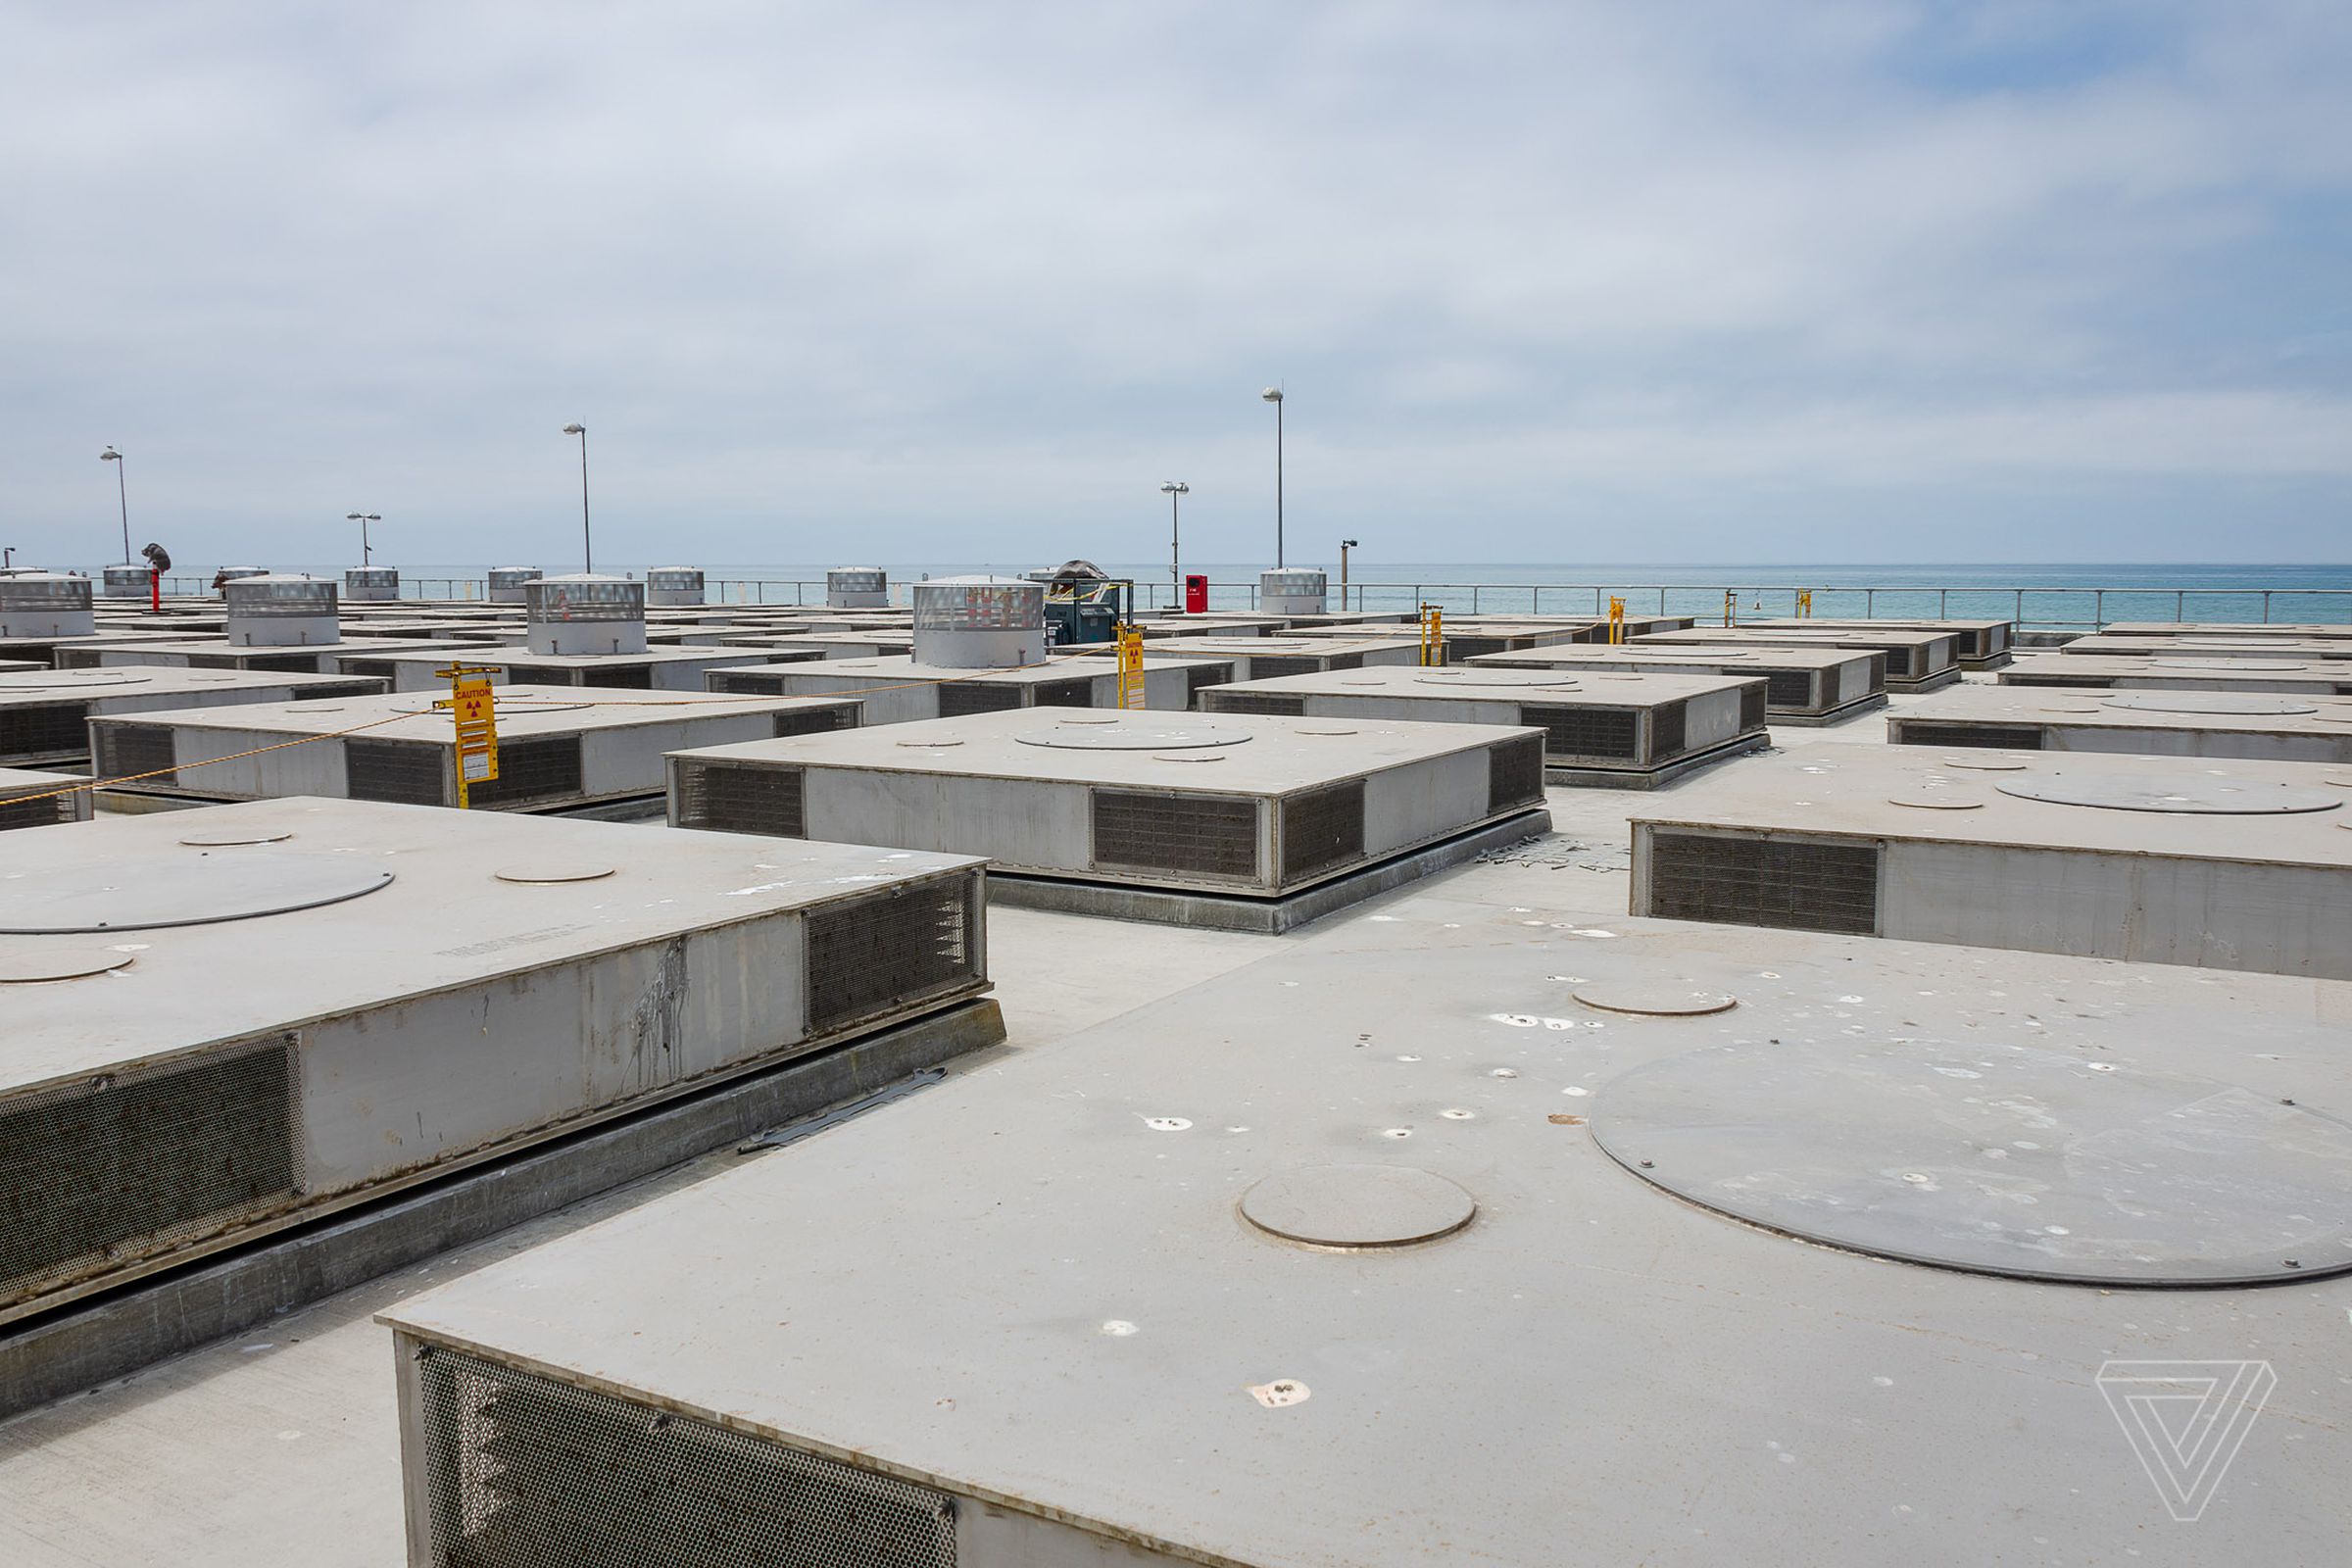 Independent Spent Fuel Storage Installations (ISFSI) at the San Onofre Nuclear Generating Station